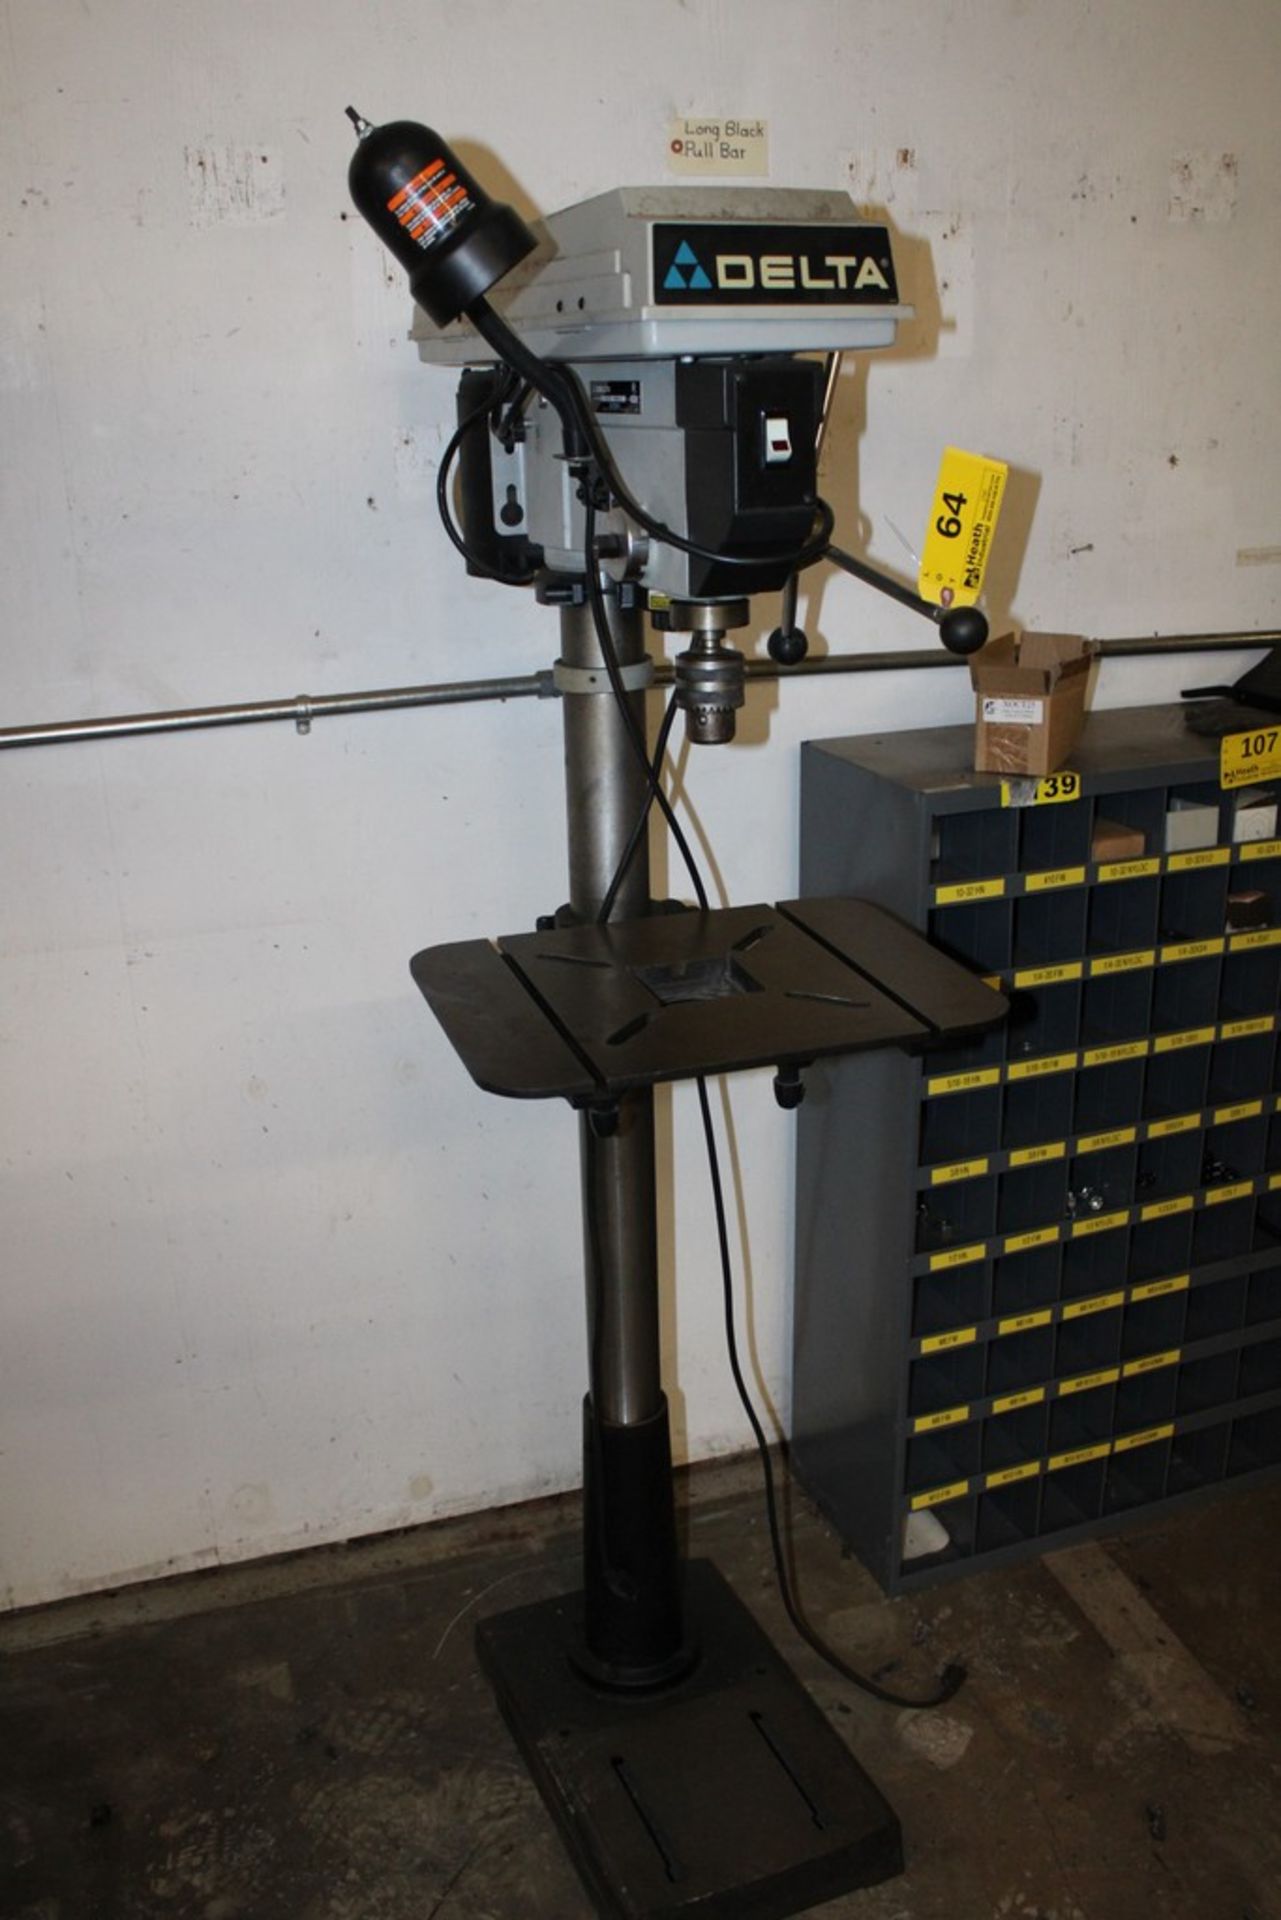 DELTA MODEL 17-950L 16-1/2" FLOOR STANDING DRILL PRESS, 14" X 18" SLOTTED TABLE, WORK LIGHT